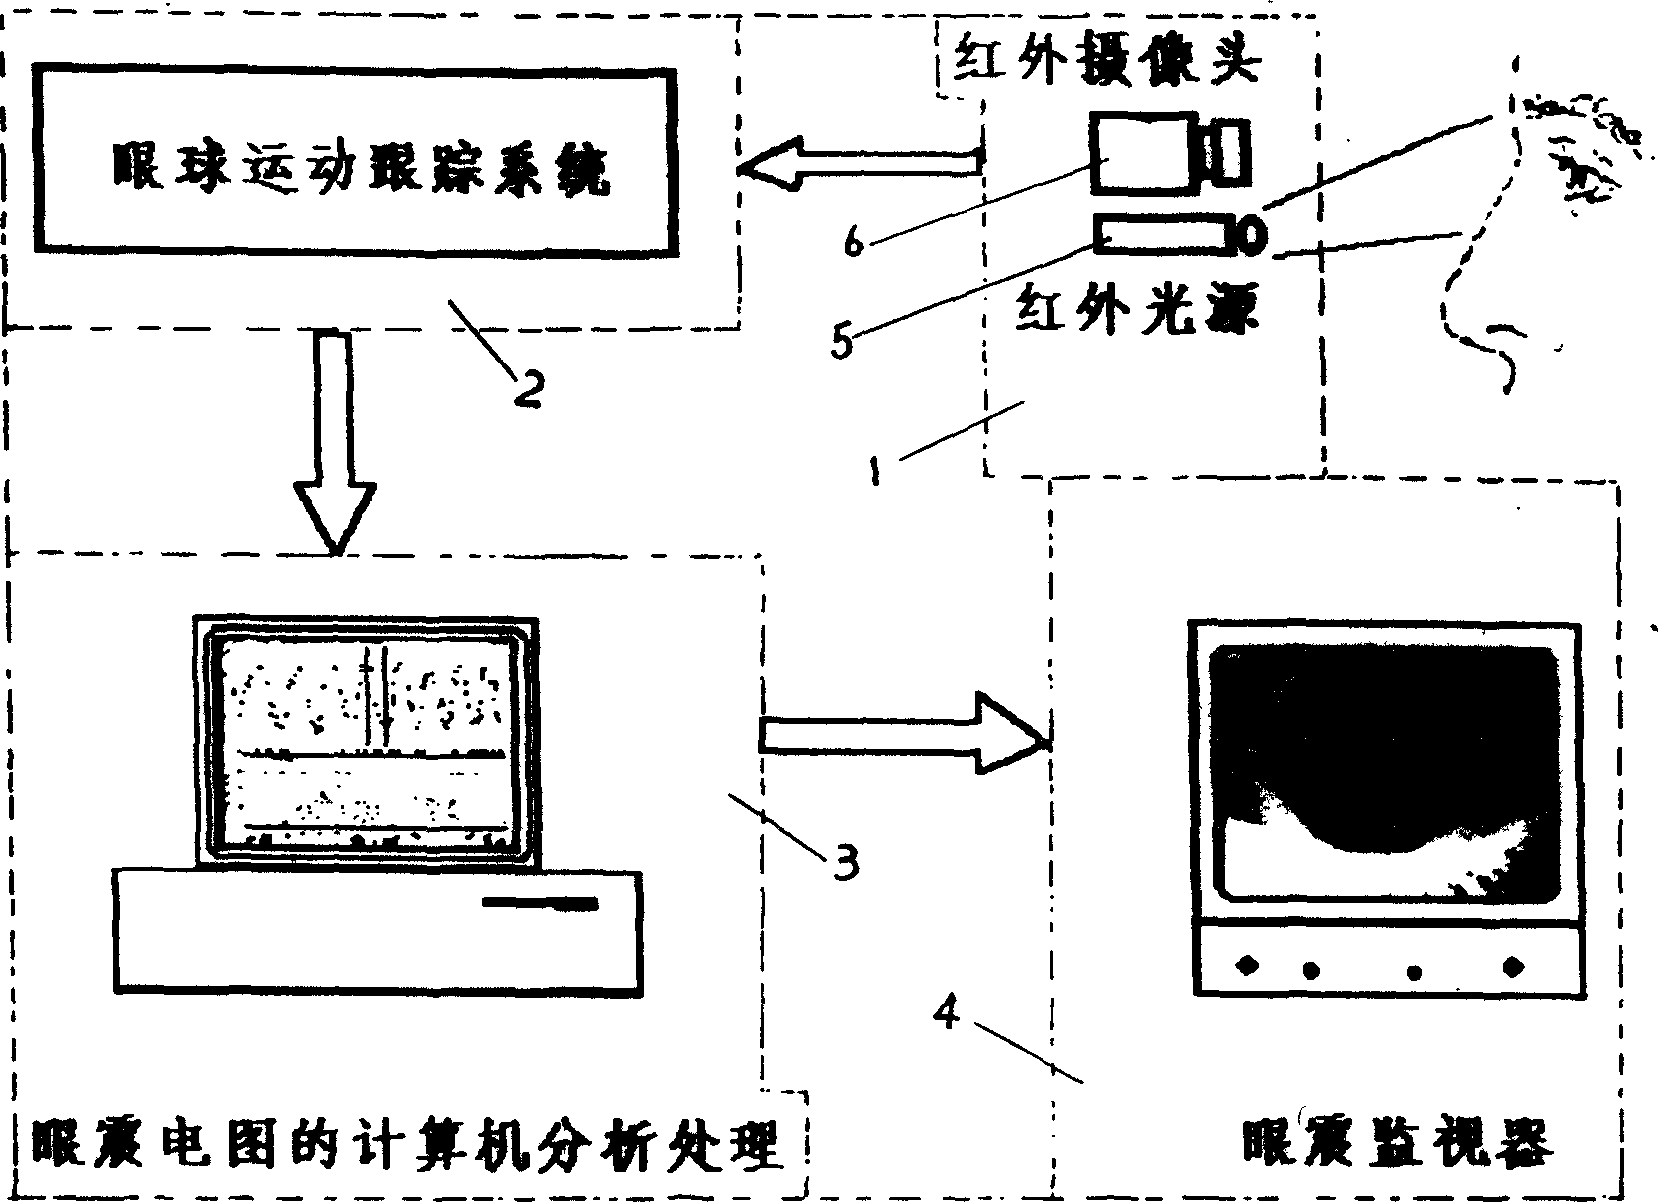 Video frequency electronystagmograph instrument and automatic generation of video frequency electronystagmograph